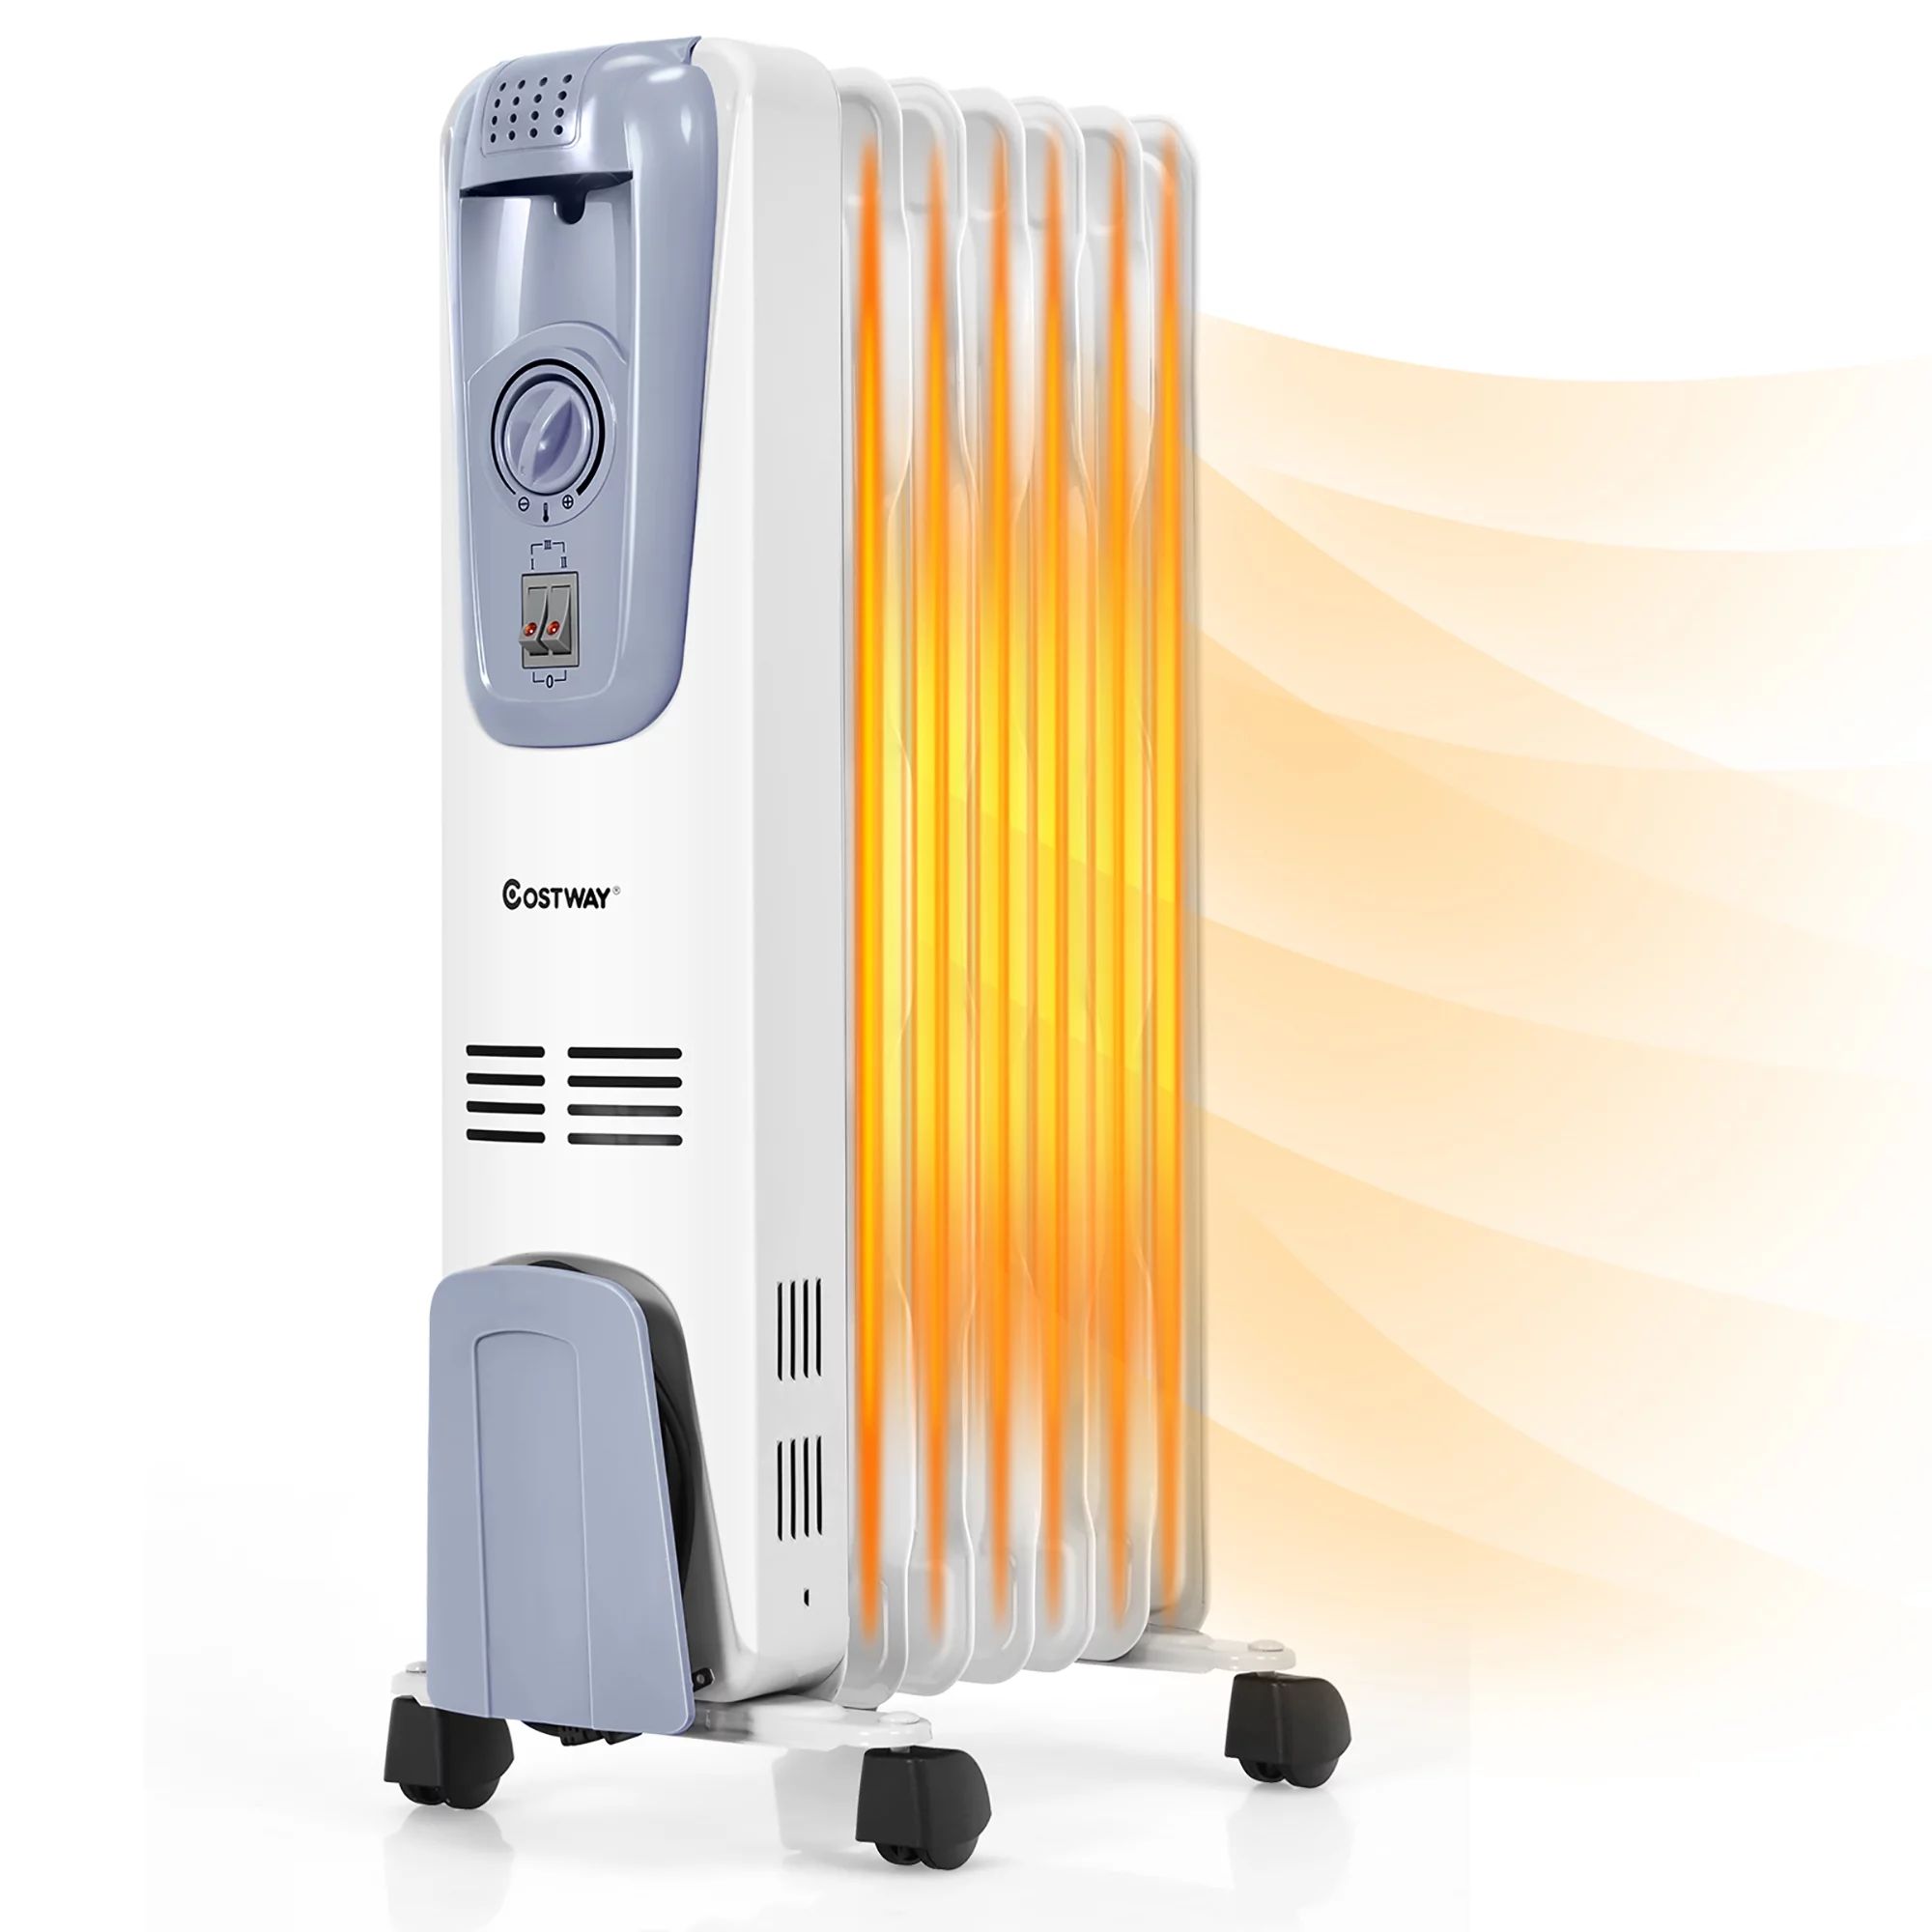 Costway 1500W Electric Oil Filled Radiator Space Heater 7-Fin Thermostat Room Radiant | Walmart (US)